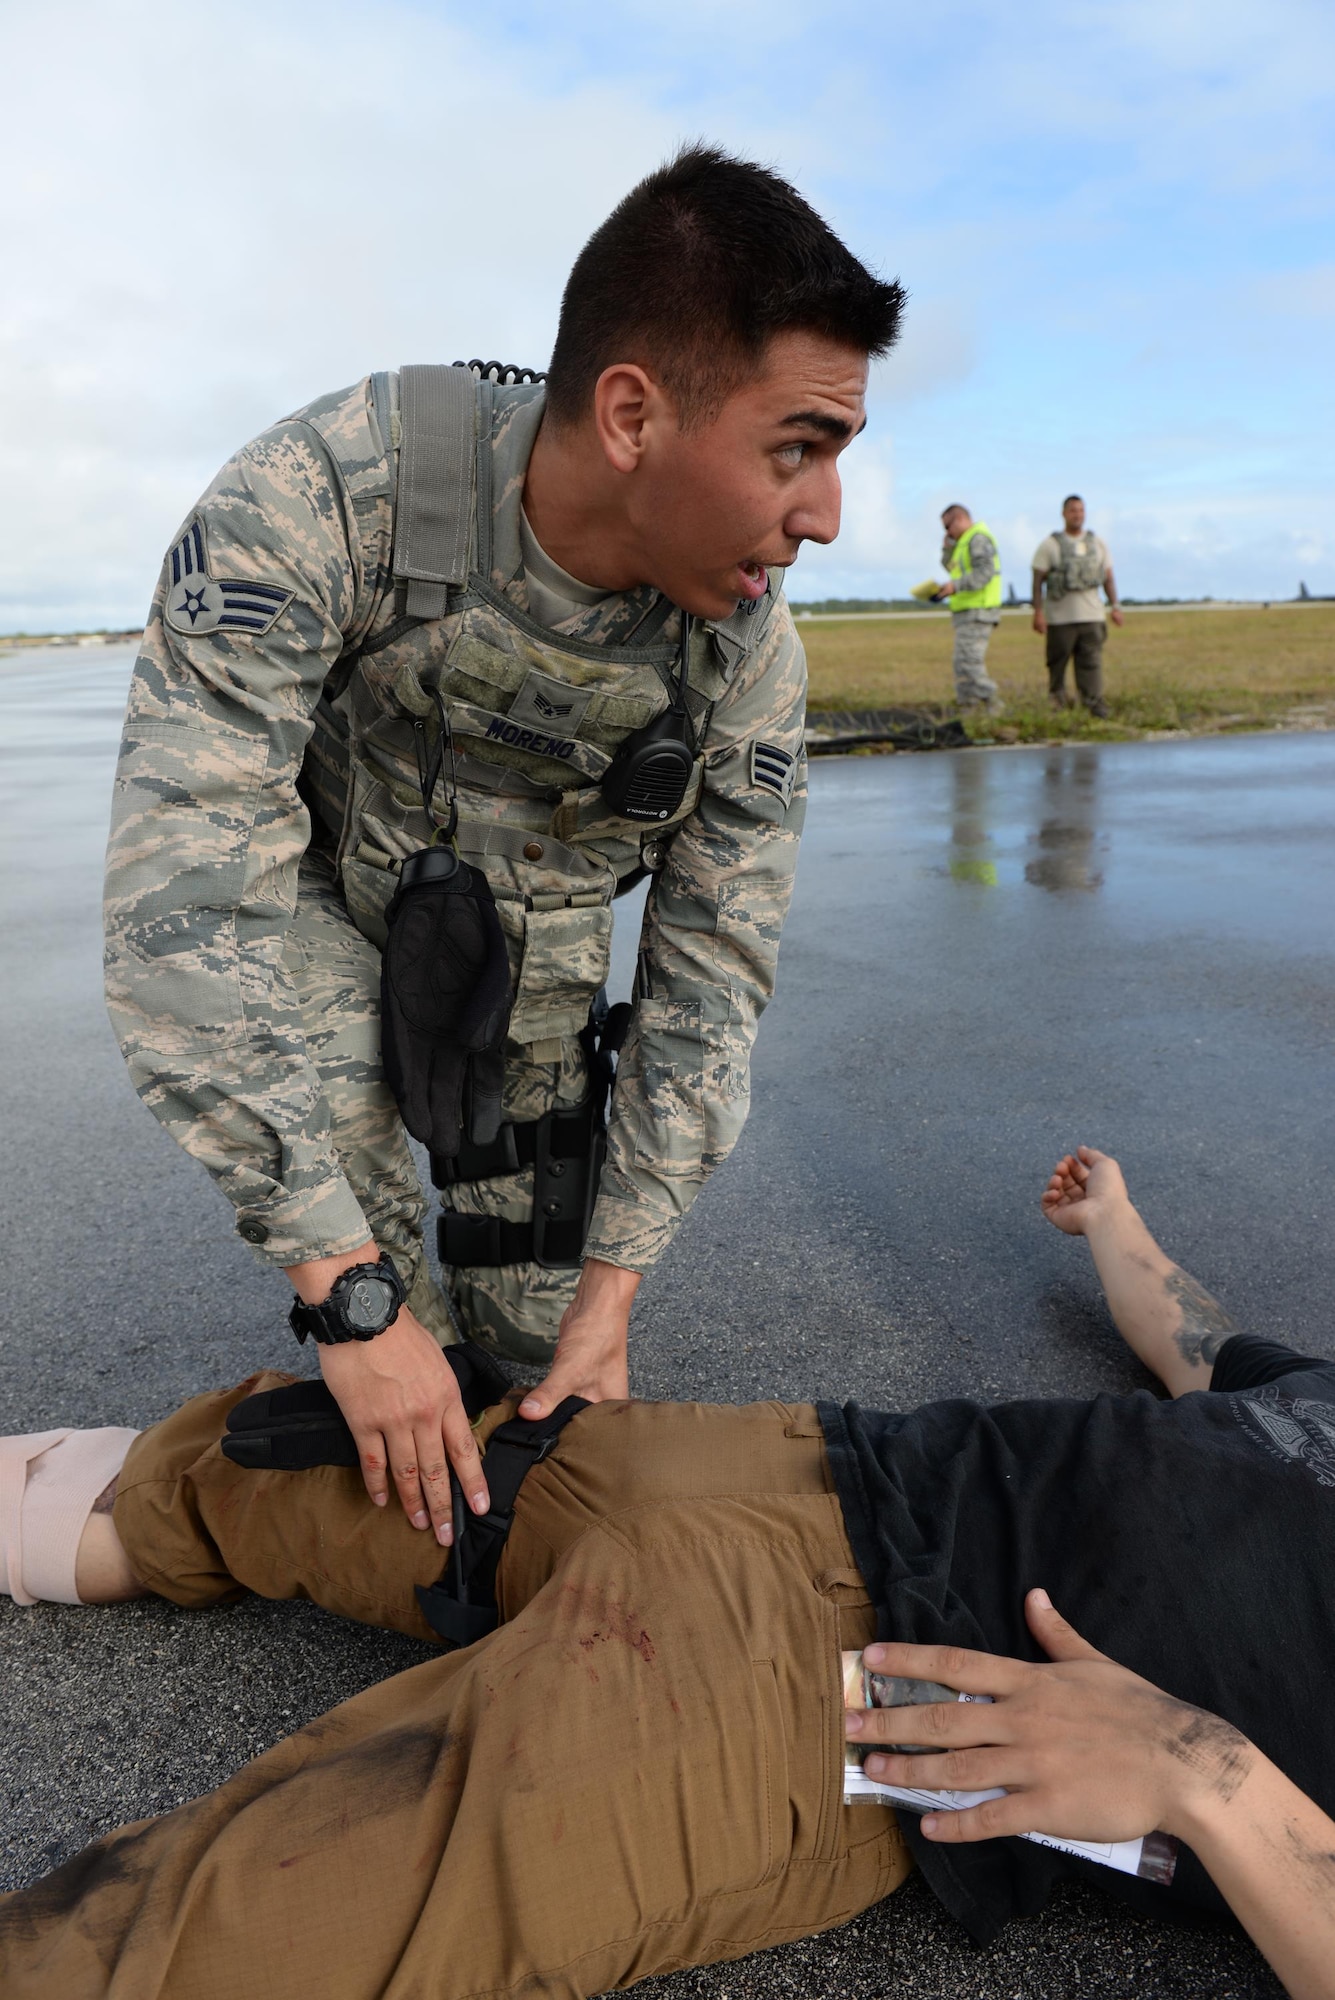 Senior Airman Nicholas Moreno, 36th Security Forces Squadron entry controller, tightens a tourniquet on a simulated injury during a massive accident response exercise Feb. 3, 2016, at Andersen Air Force Base, Guam. This exercise tested Andersen AFB’s emergency readiness to prepare for the Pacific Air Partners Open House that is scheduled for Feb. 20. (U.S. Air Force photo/Airman 1st Class Jacob Skovo)